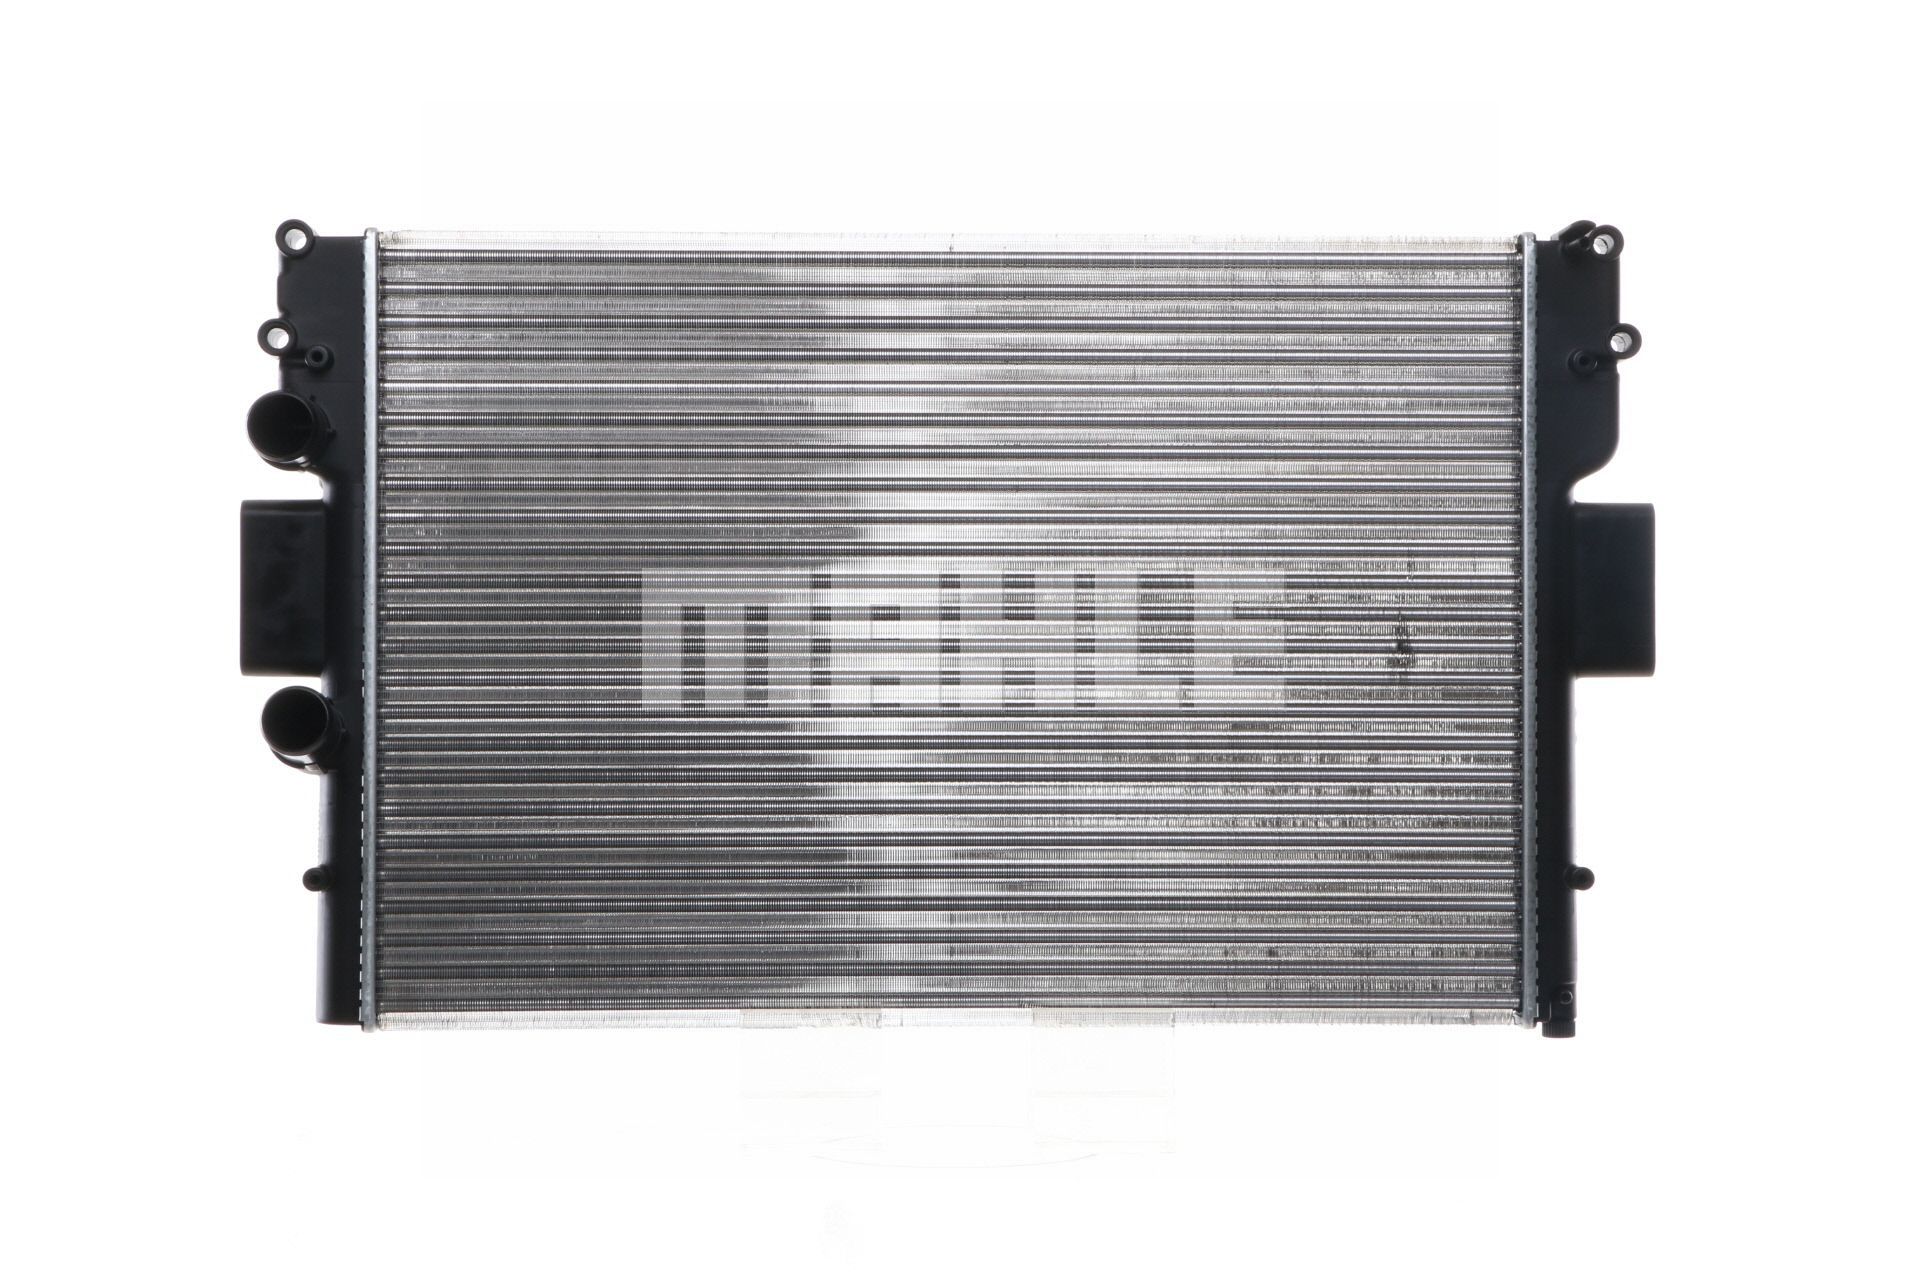 376760624 MAHLE ORIGINAL 650 x 453 x 34 mm, Mechanically jointed cooling fins Radiator CR 1254 001S buy